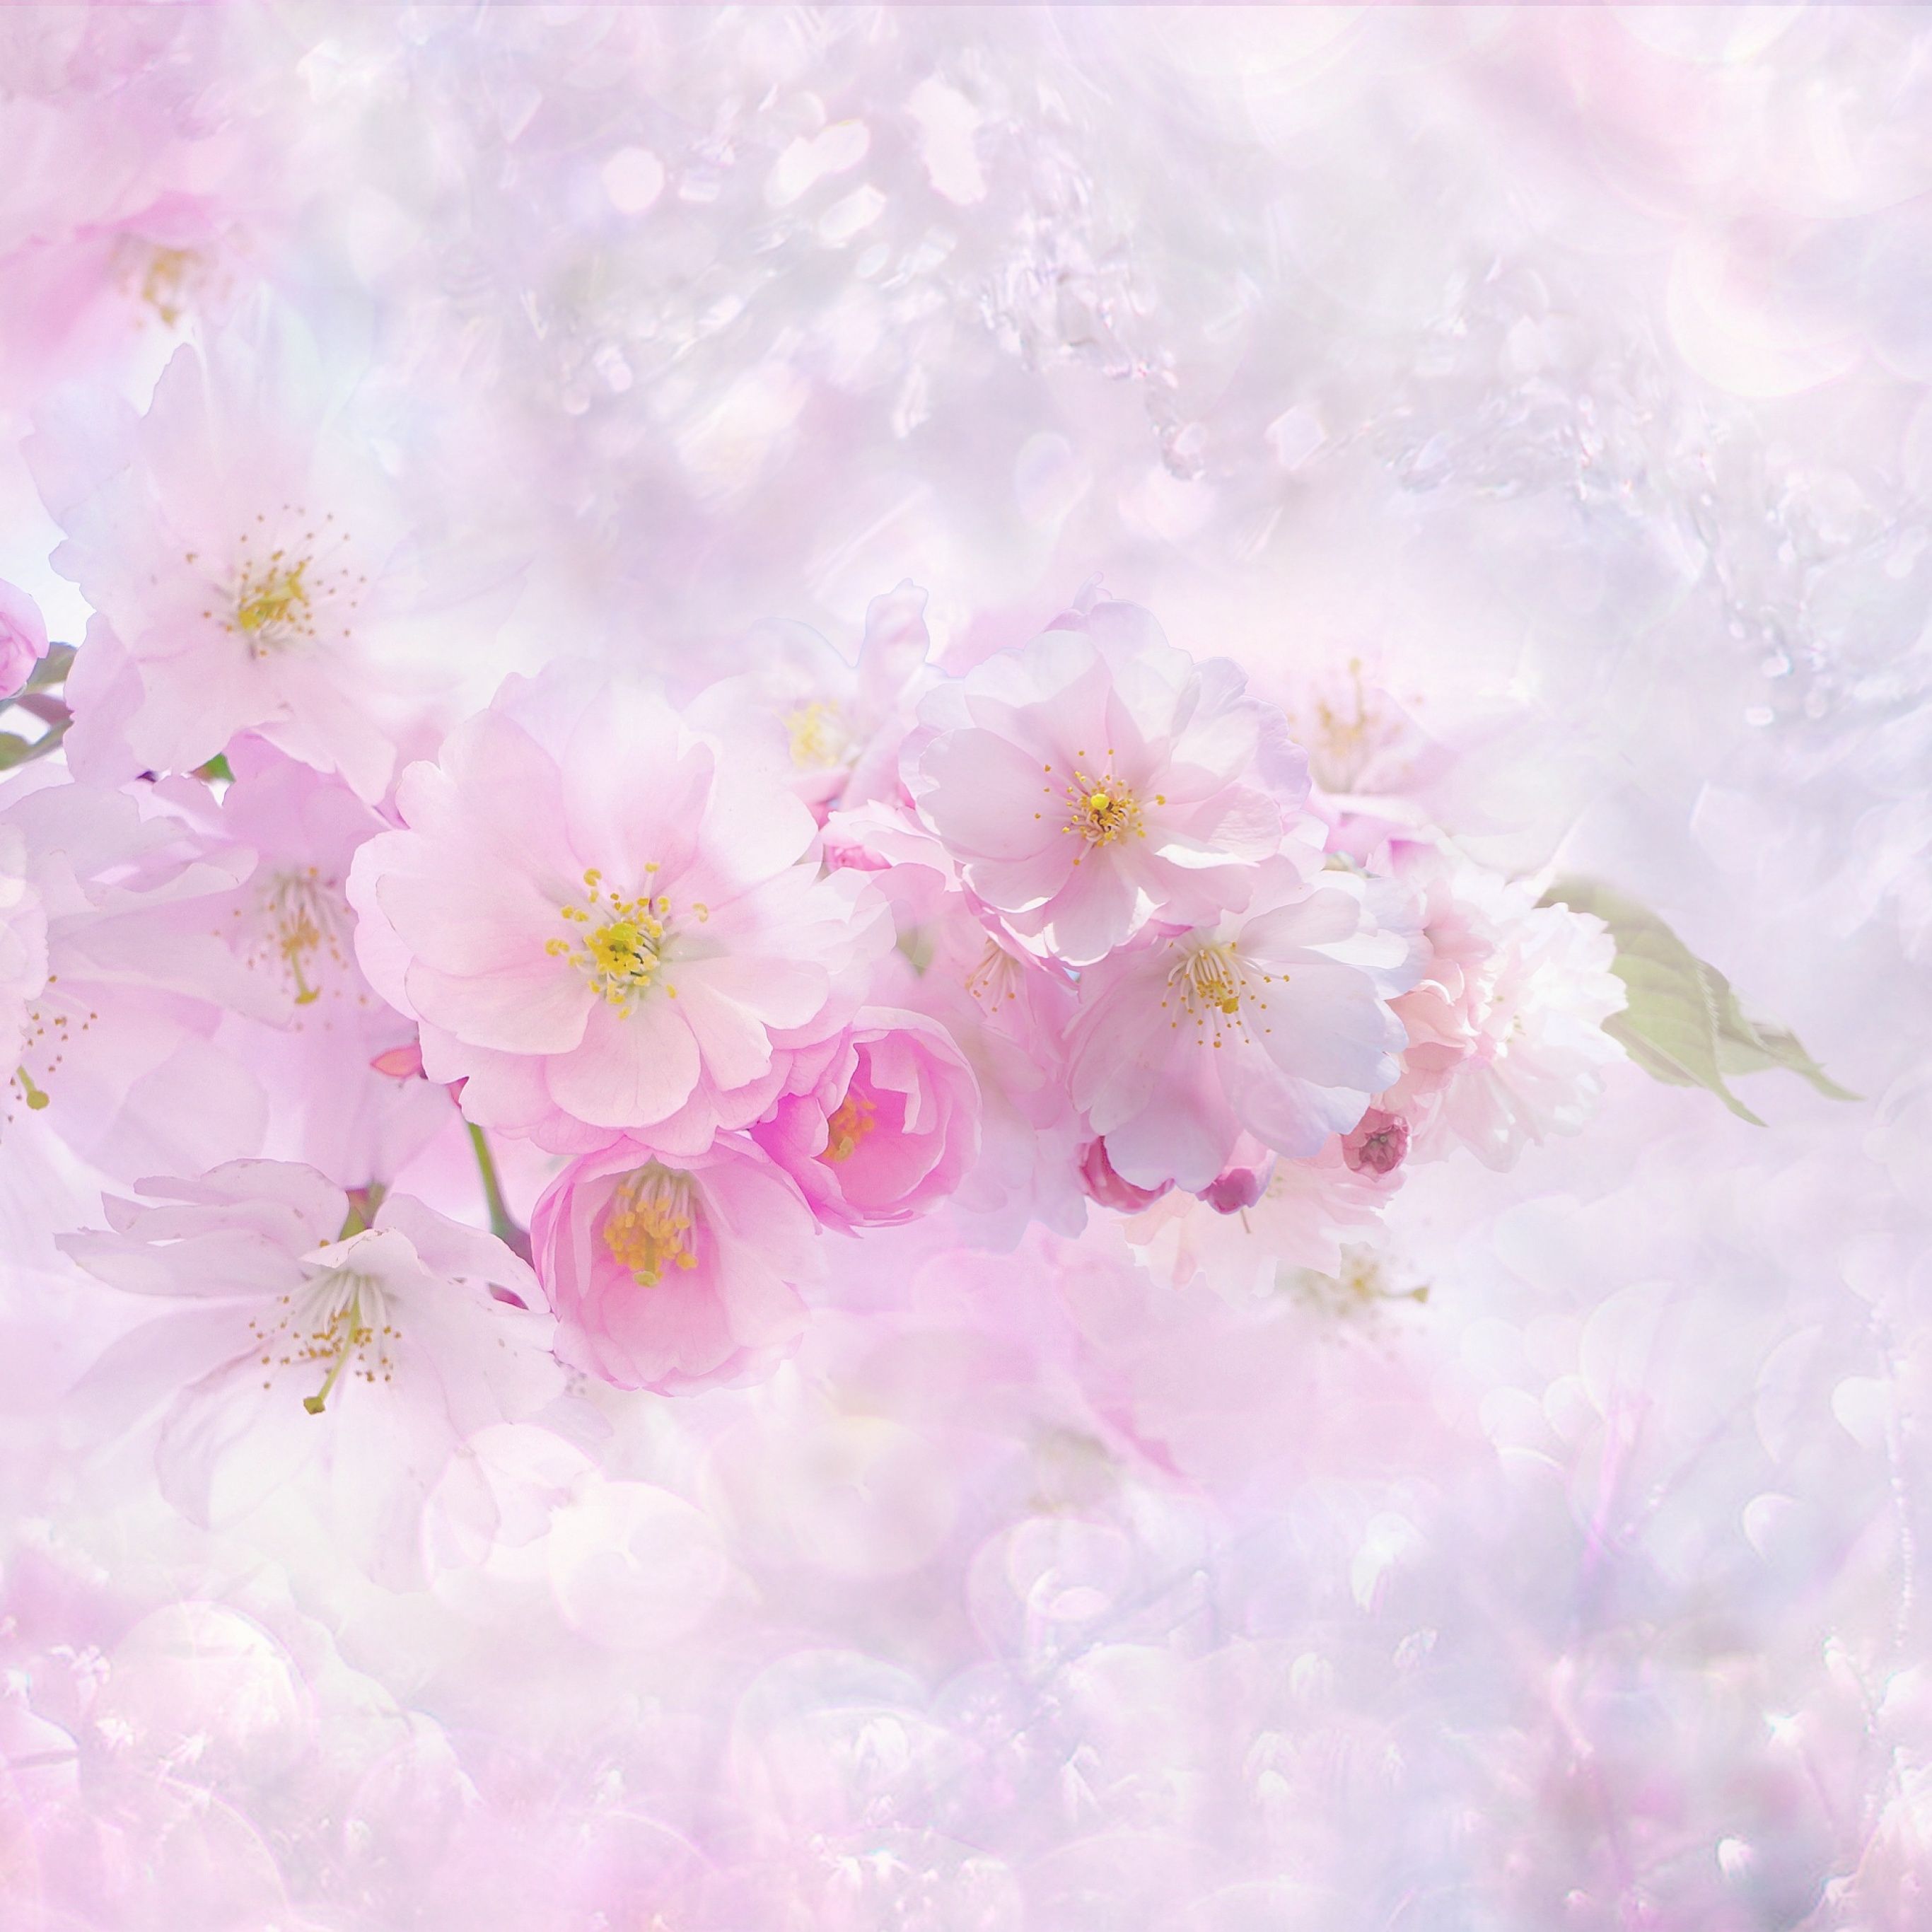 A picture of pink flowers on the wall - Cherry blossom, spring